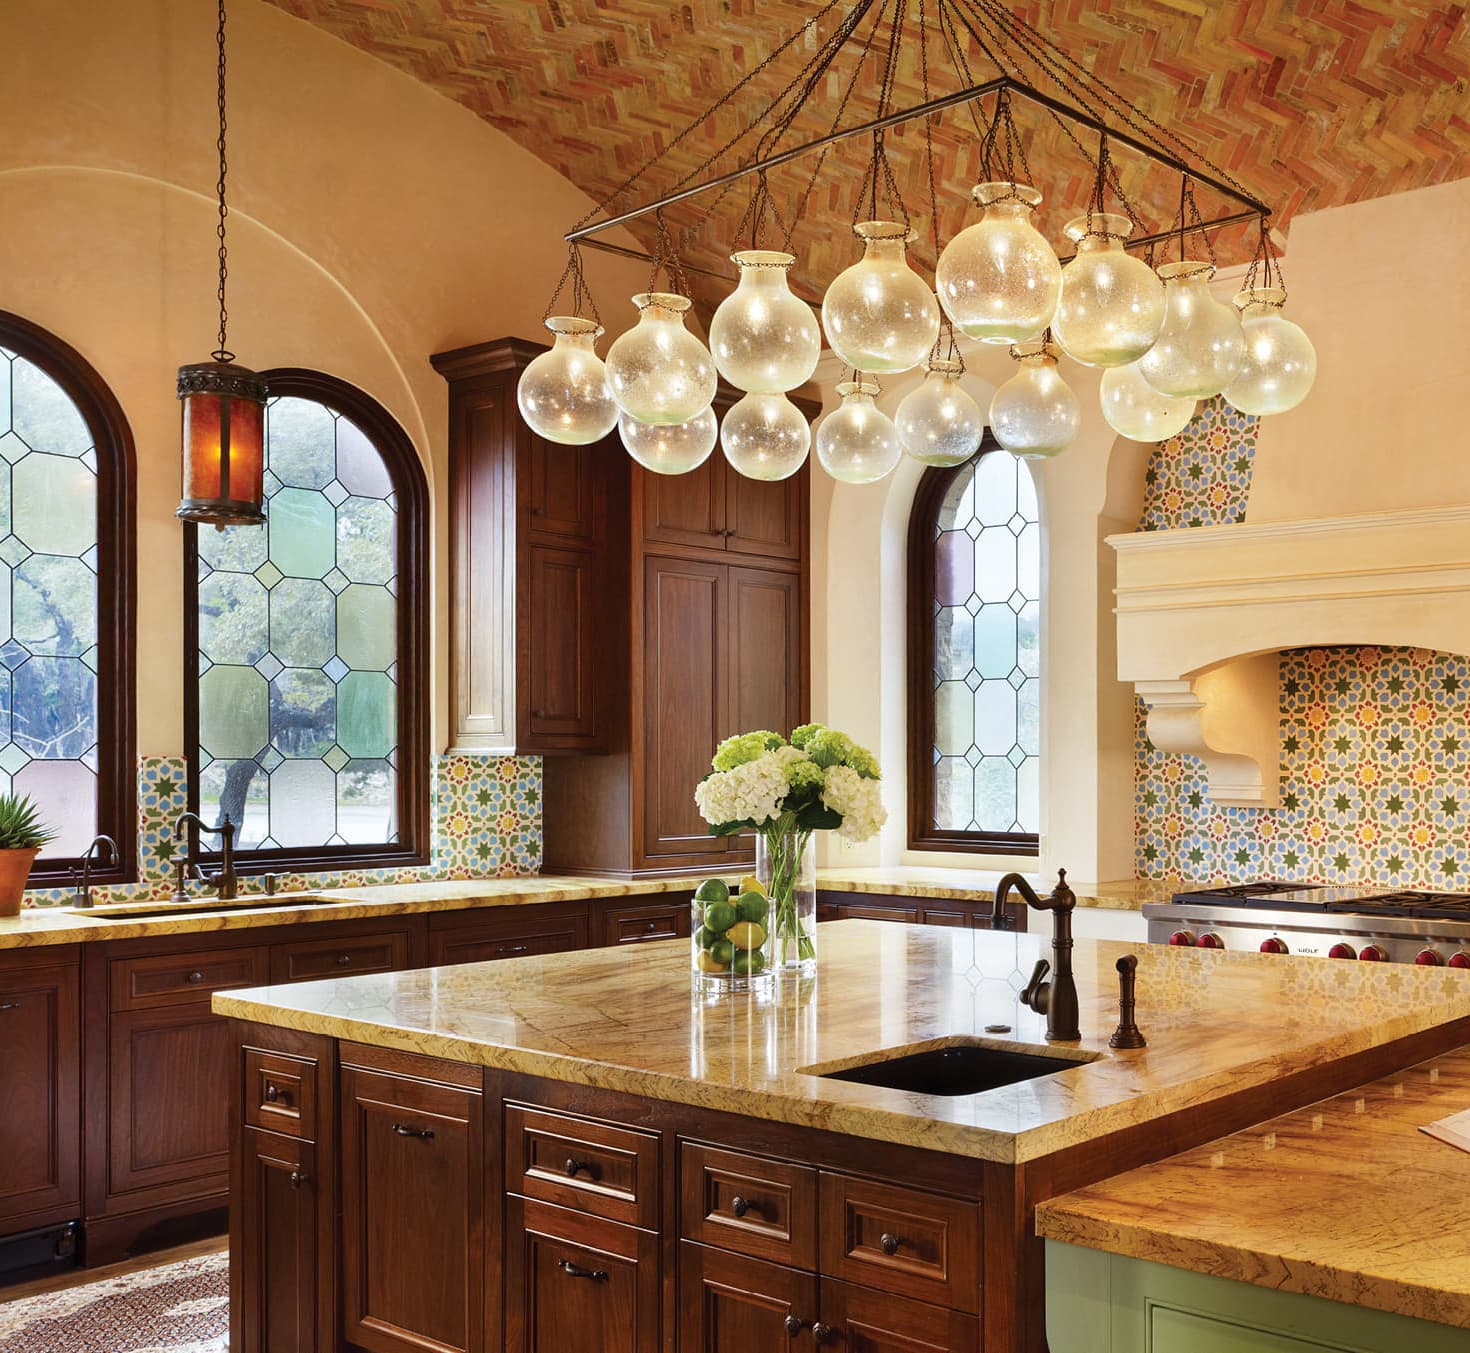 Kitchen with marble counters and glass bulb chandelier